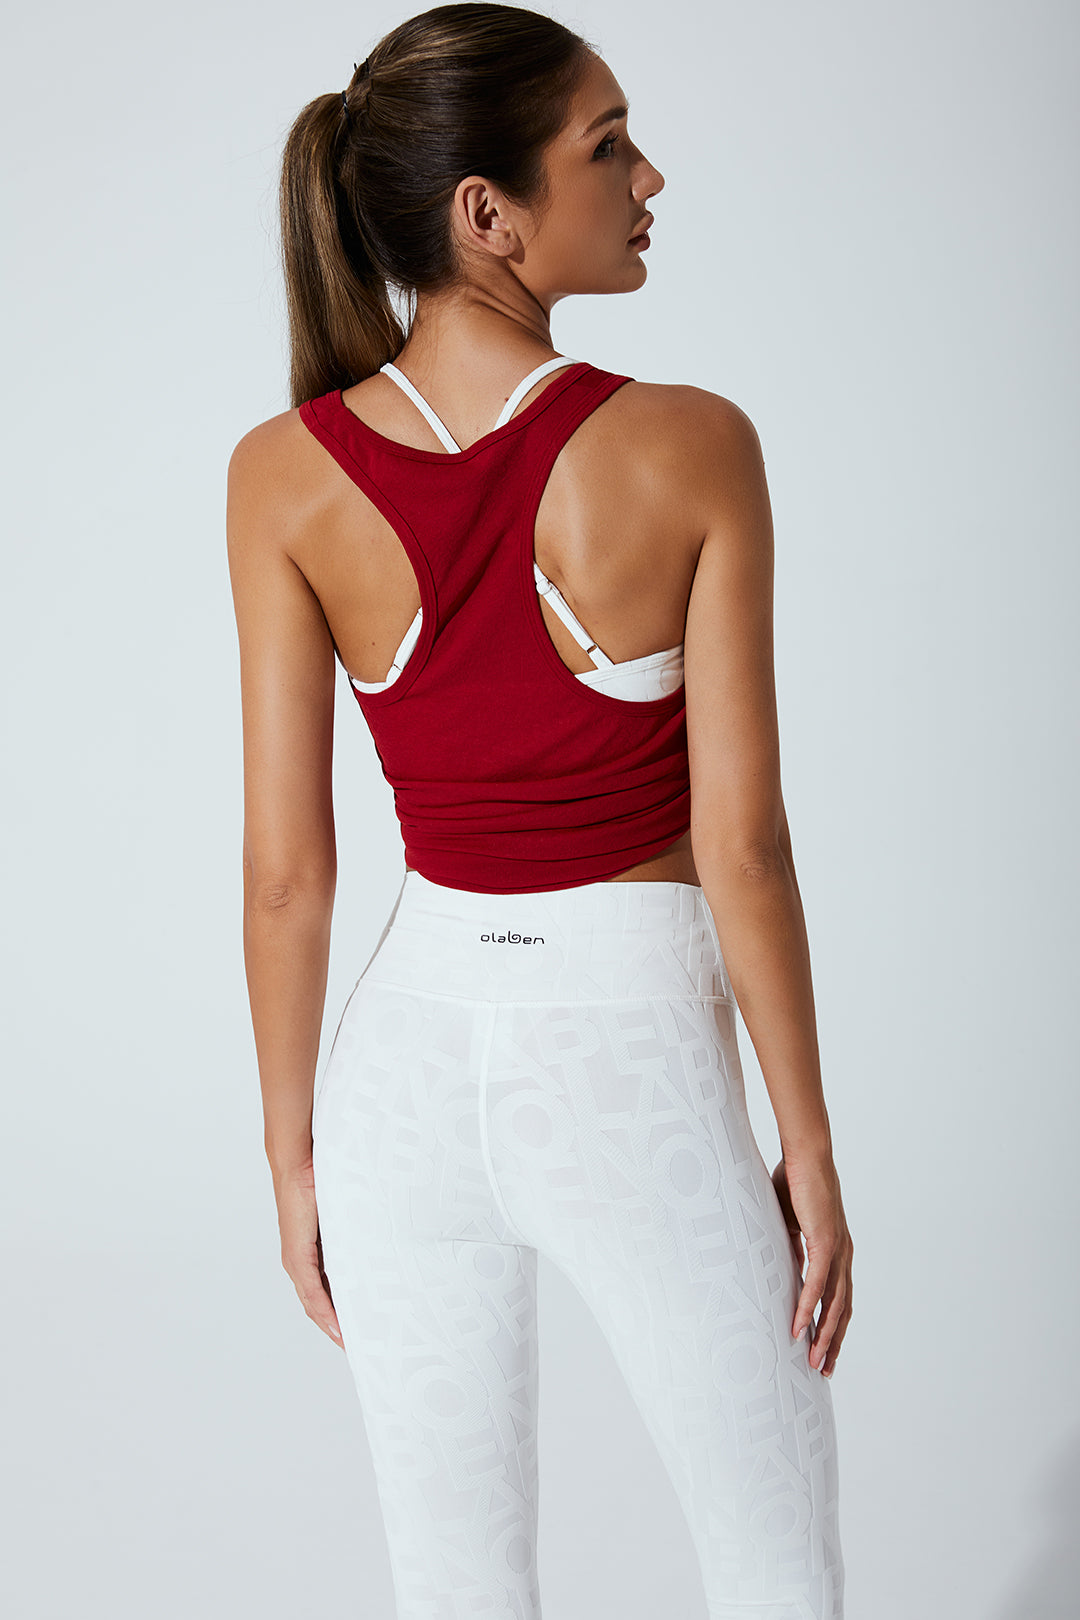 Vera Olaben women's tank top in savvy red, a stylish and comfortable choice for summer.